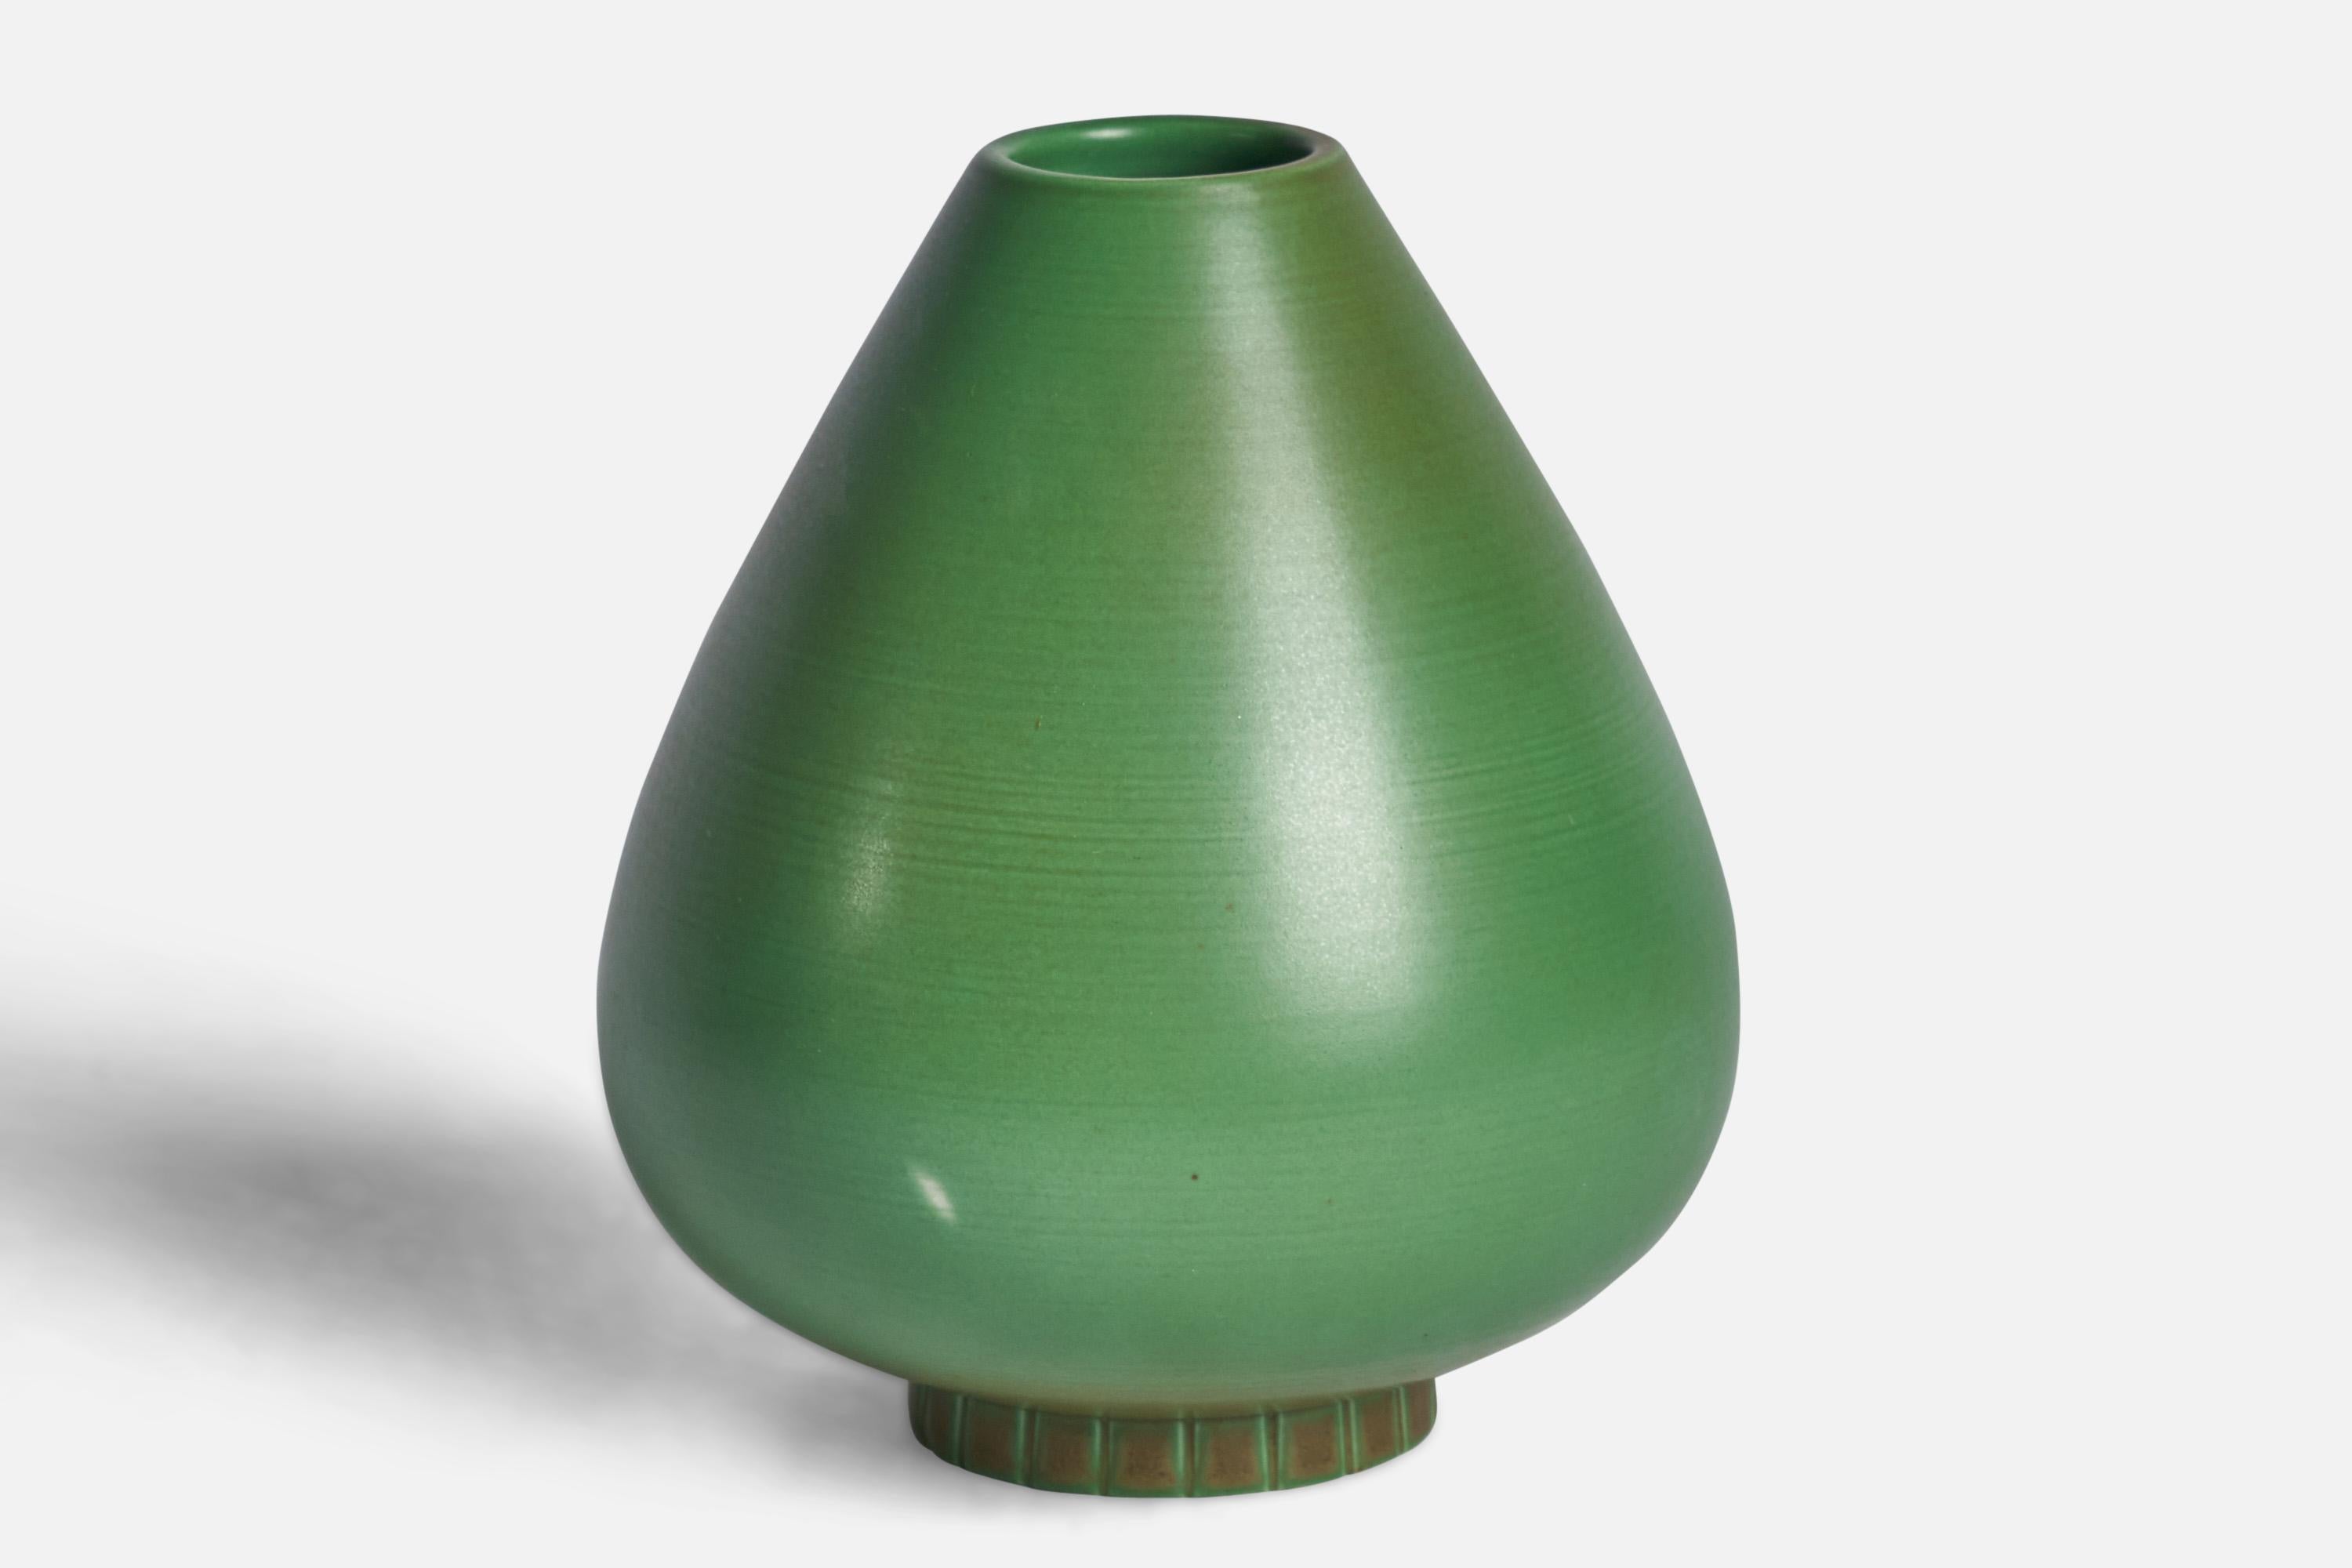 A green-glazed stoneware vase designed by Gunnar Nylund and produced by Rörstrand, Sweden, 1940s.